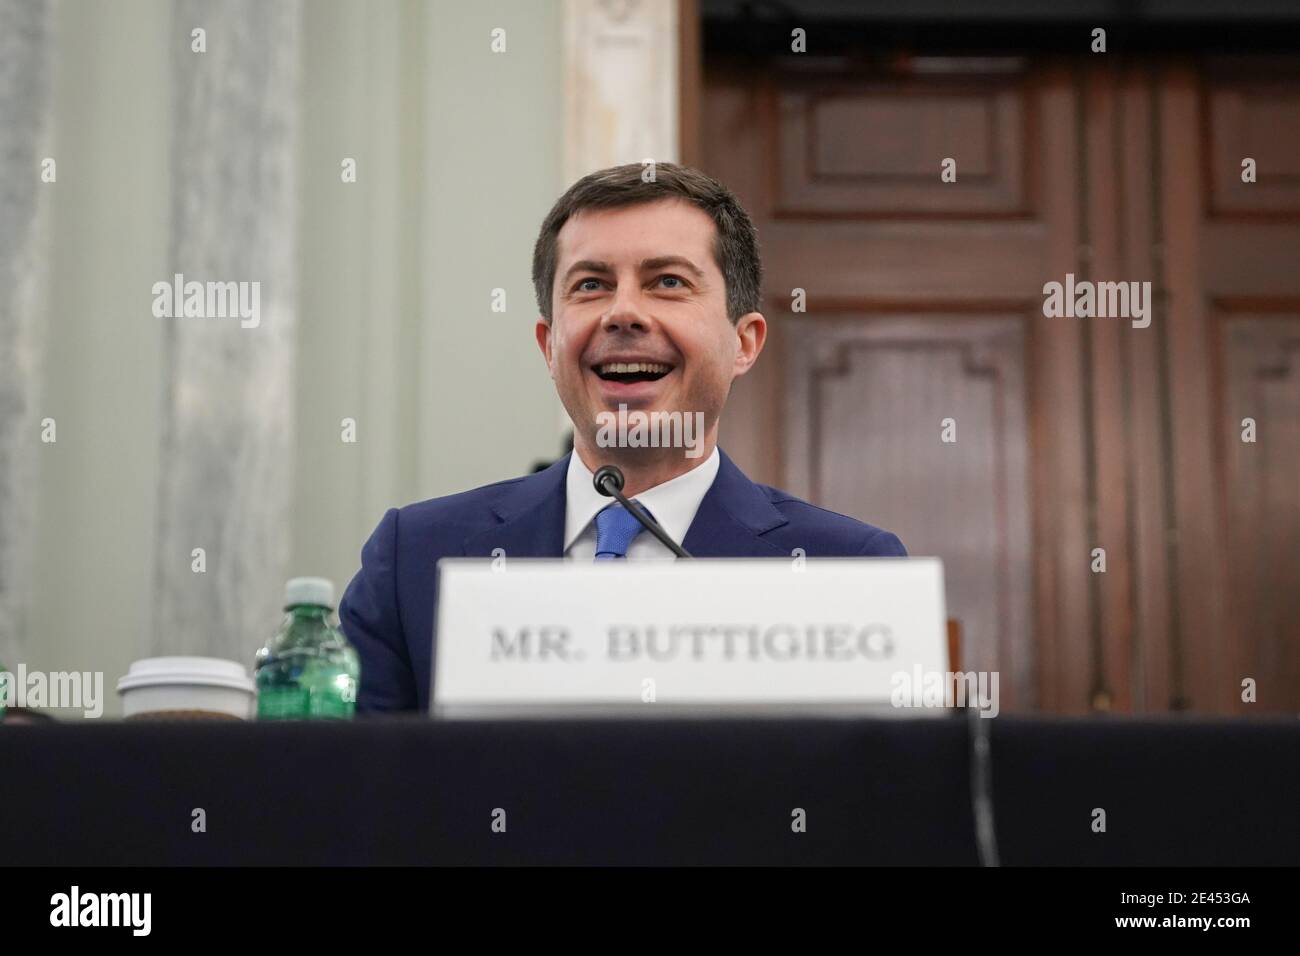 Washington, DC, USA. 21st Jan, 2021. Pete Buttigieg, U.S. secretary of transportation nominee for U.S. President Joe Biden, smiles during a Senate Commerce, Science and Transportation Committee confirmation hearing in Washington, DC, U.S., on Thursday, Jan. 21, 2021. Buttigieg, is pledging to carry out the administration's ambitious agenda to rebuild the n sation's infrastructure, calling it a 'generational opportunity' to create new jobs, fight economic inequality and stem climate change. Credit: Stefani Reynolds/Pool via CNP | usage worldwide Credit: dpa/Alamy Live News Stock Photo